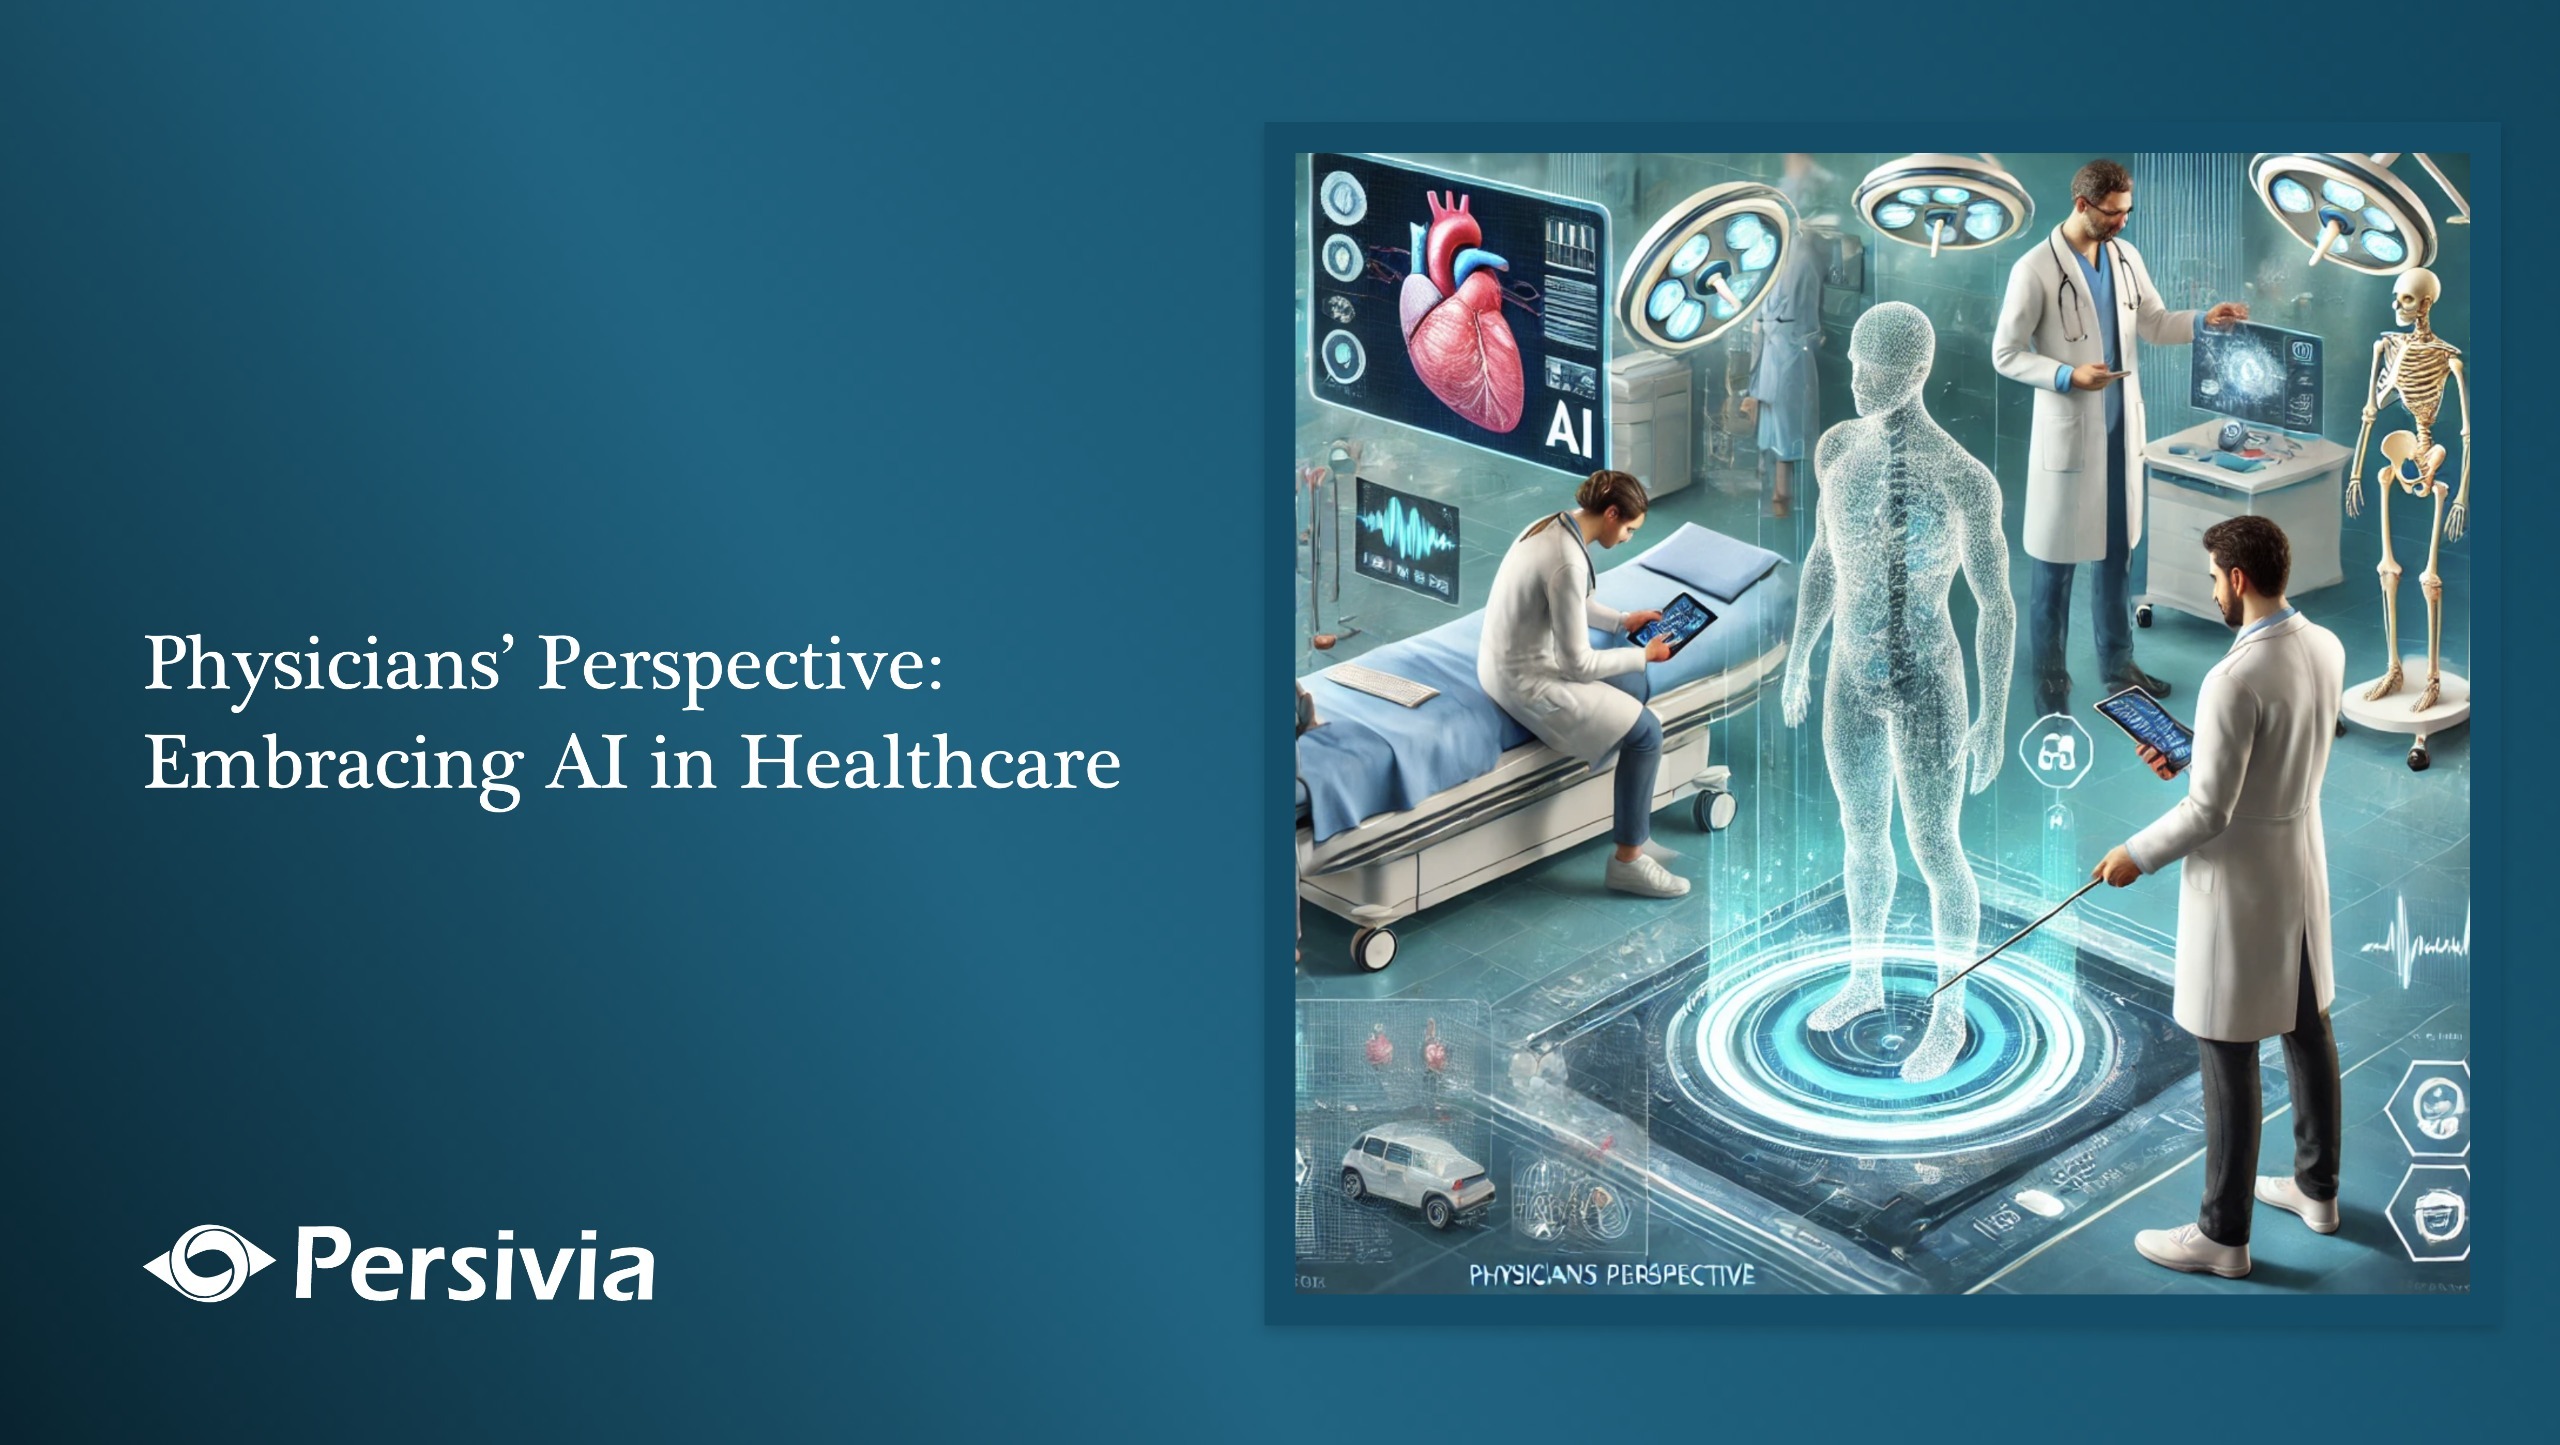 Physicians’ Perspective: Embracing AI in Healthcare